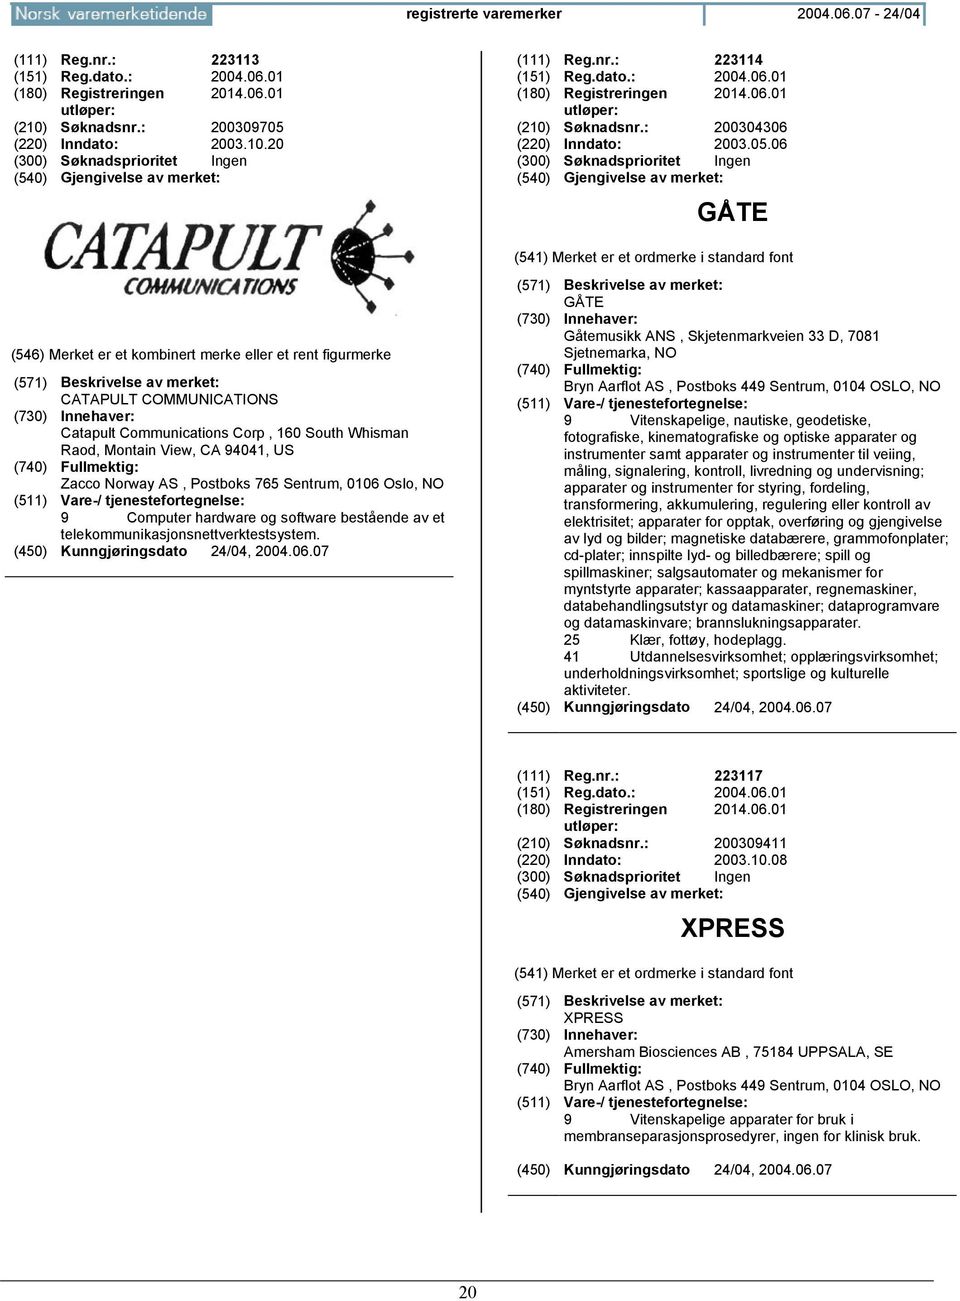 06 GÅTE CATAPULT COMMUNICATIONS Catapult Communications Corp, 160 South Whisman Raod, Montain View, CA 94041, US Zacco Norway AS, Postboks 765 Sentrum, 0106 Oslo, NO 9 Computer hardware og software